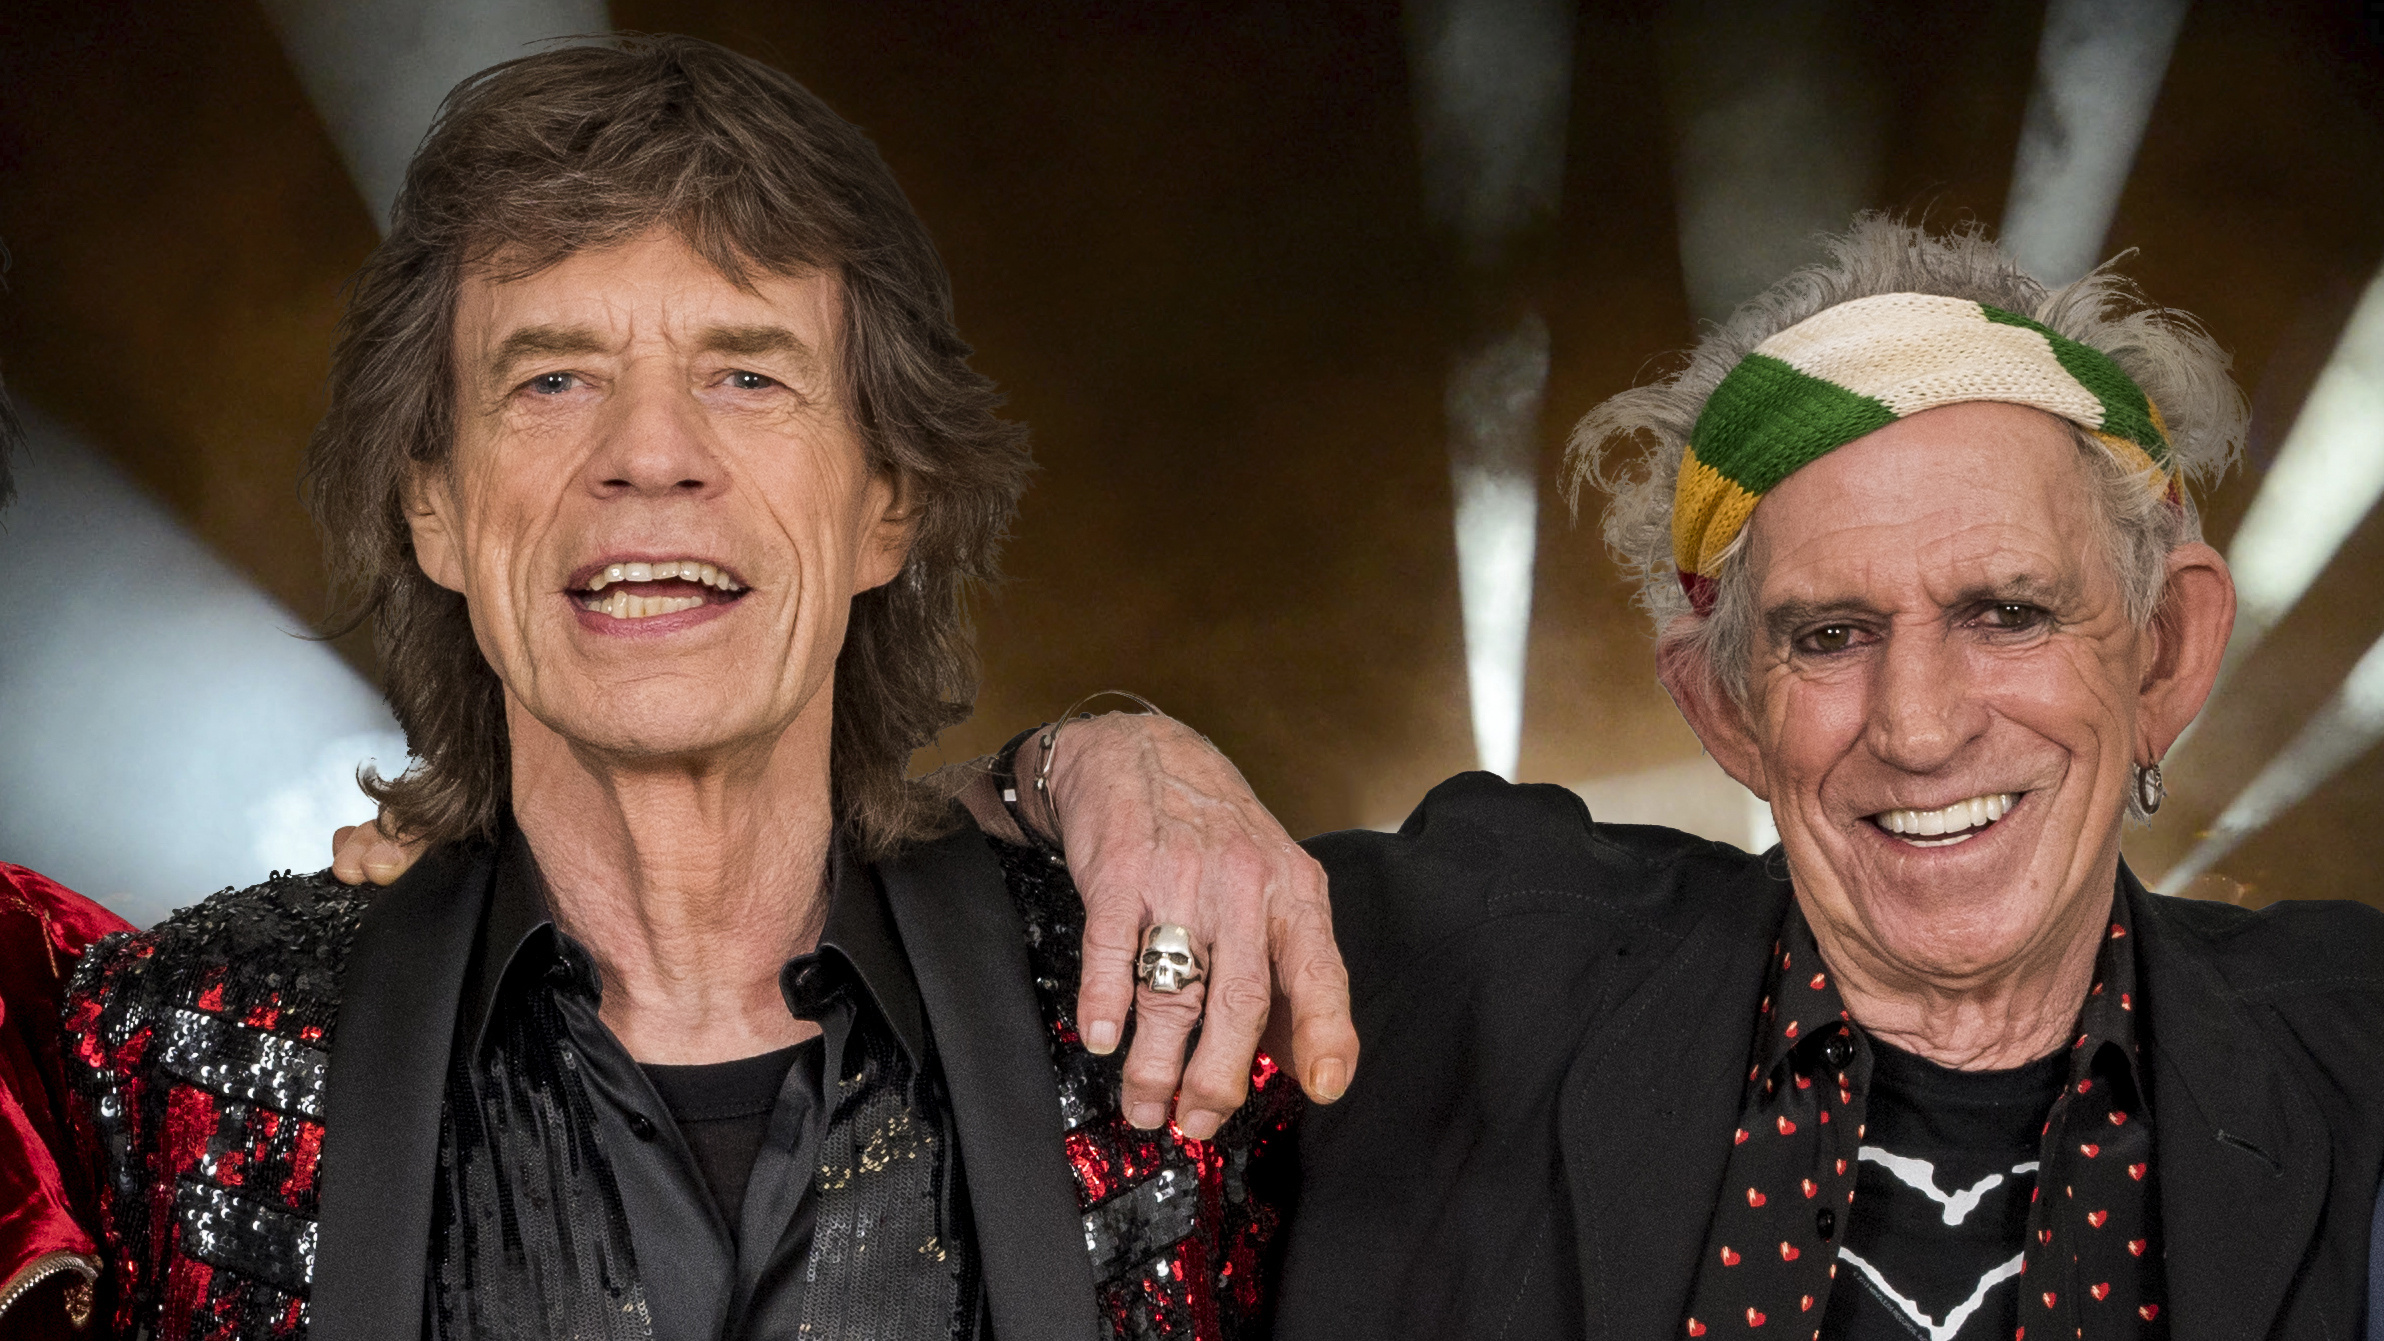 Keith Richards, Apology to Mick Jagger, Controversial remarks, Age of parenting, 2390x1350 HD Desktop